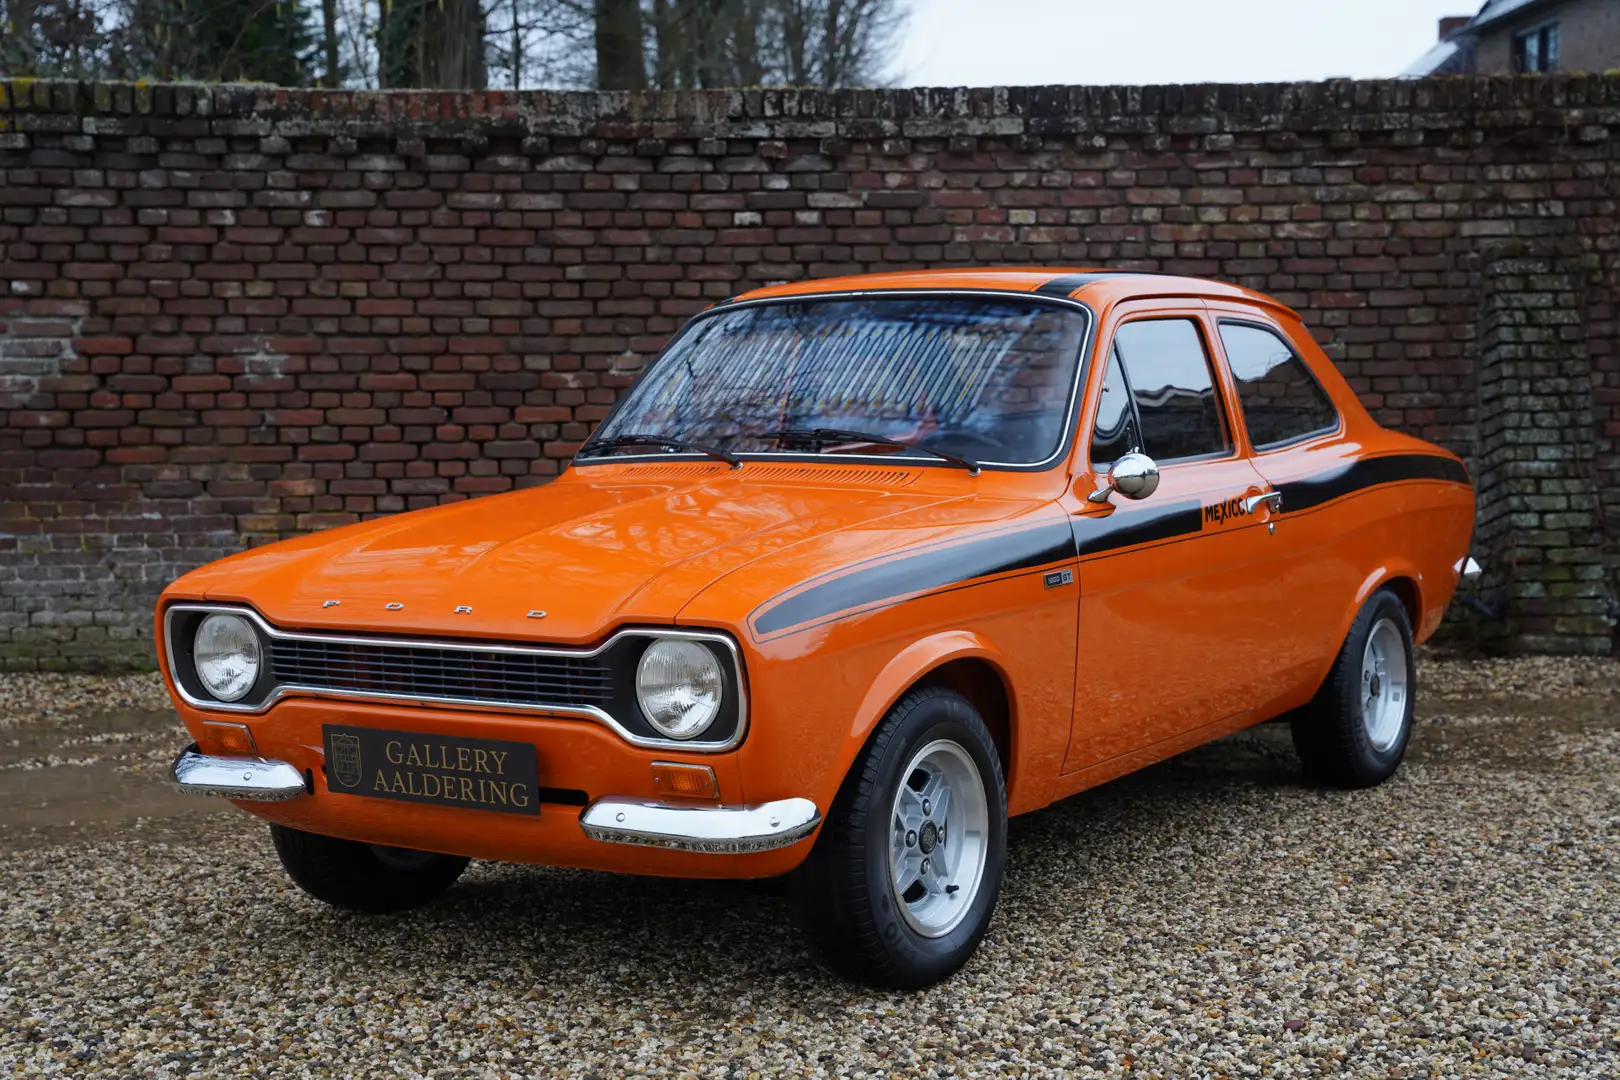 Ford Escort RS Mexico 1600 GT Mk1 Delivered new in Switzerland Naranja - 1